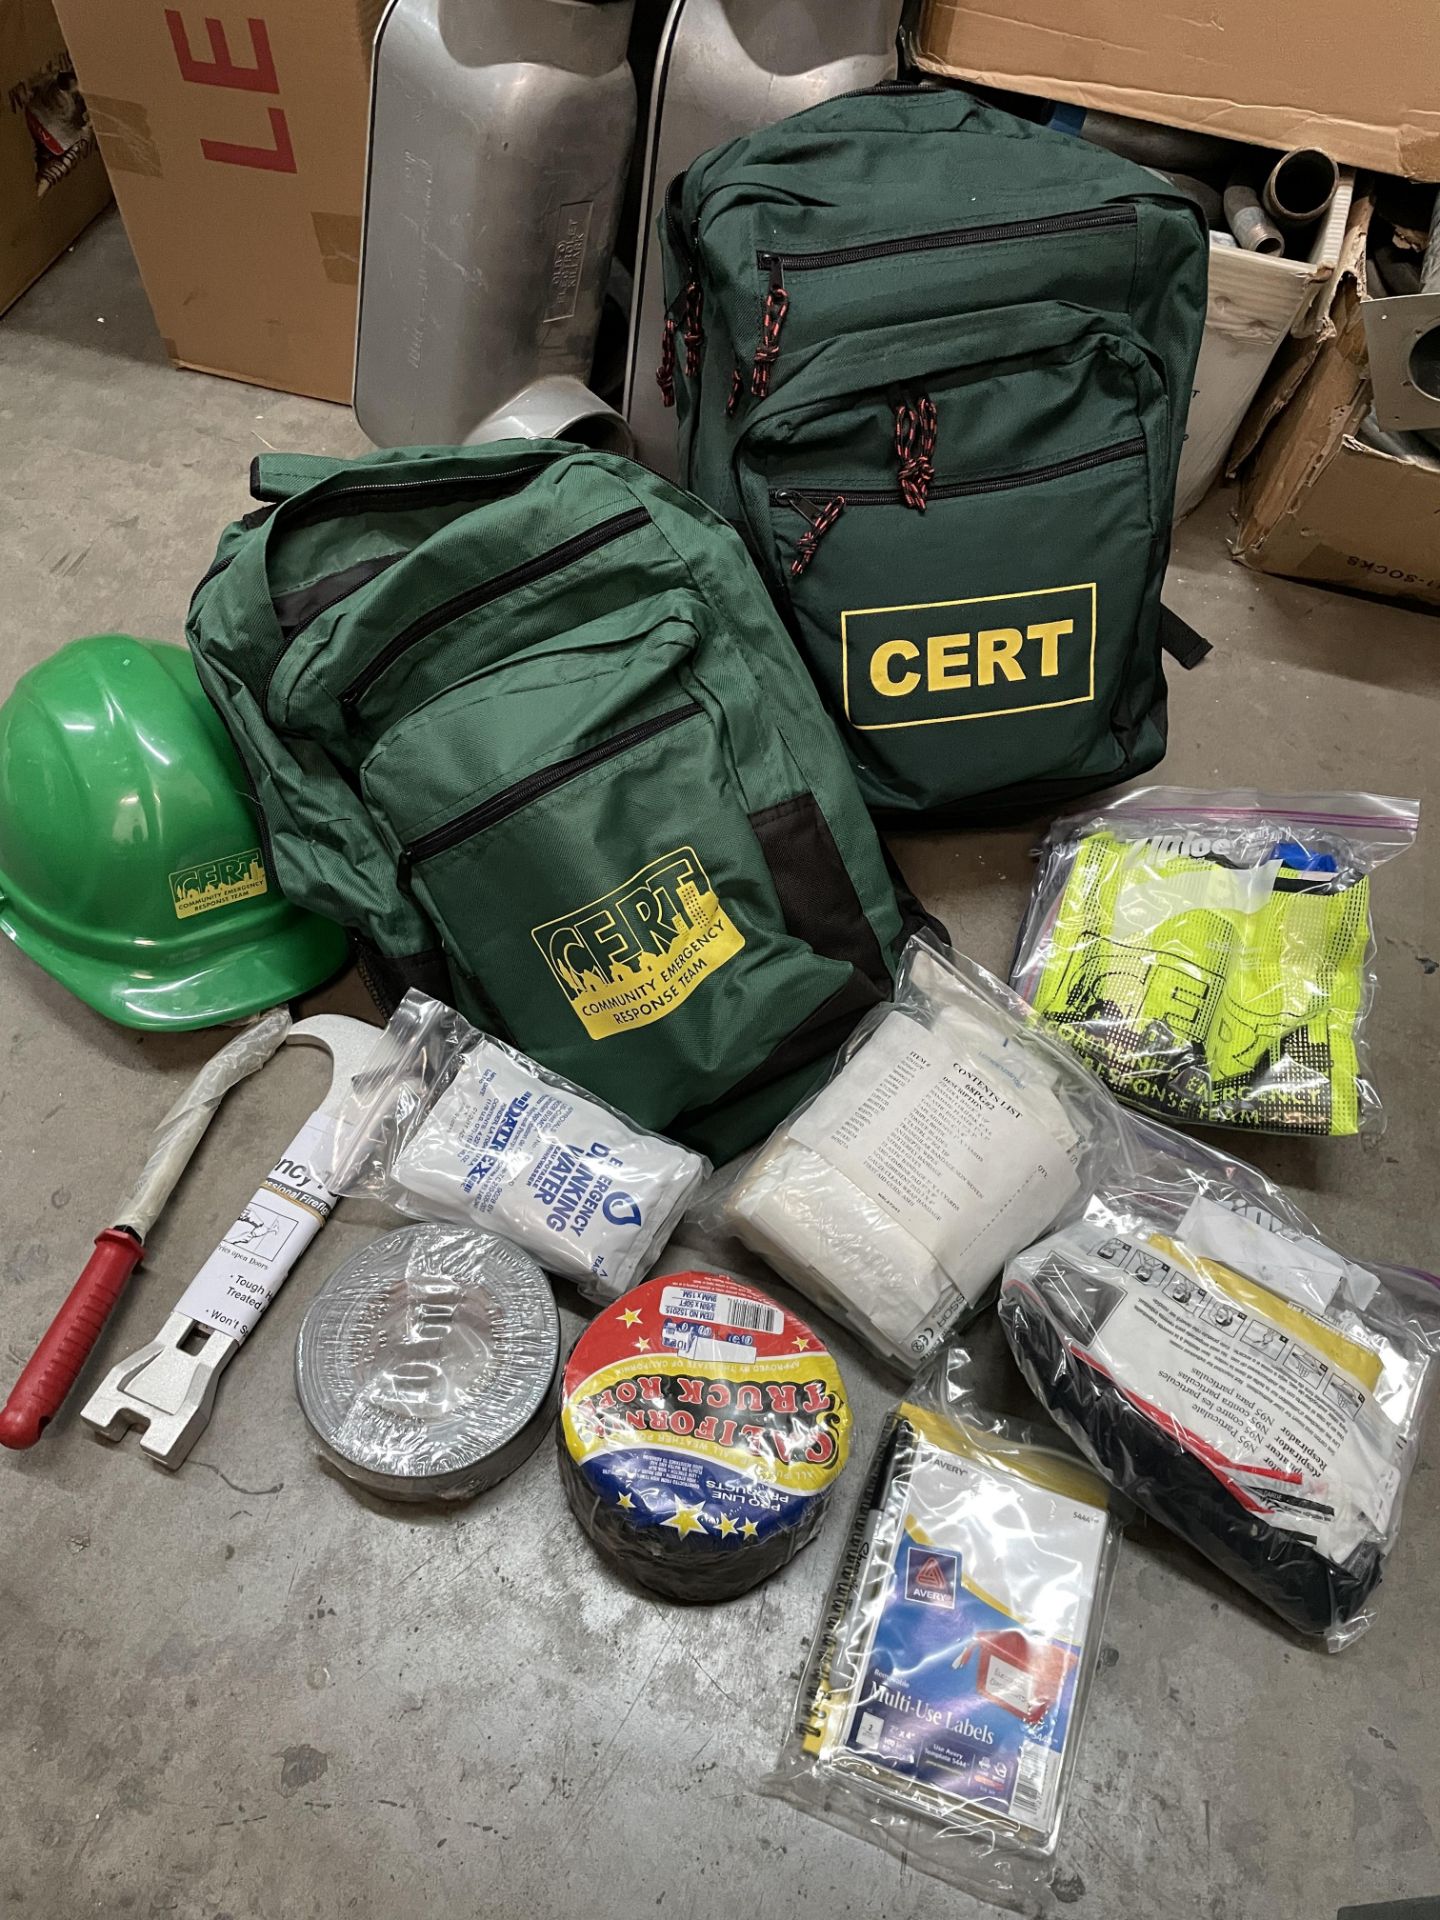 2x CERT Community Emergency Response Team Backpacks with emergency essentials and hard hats - Image 2 of 8